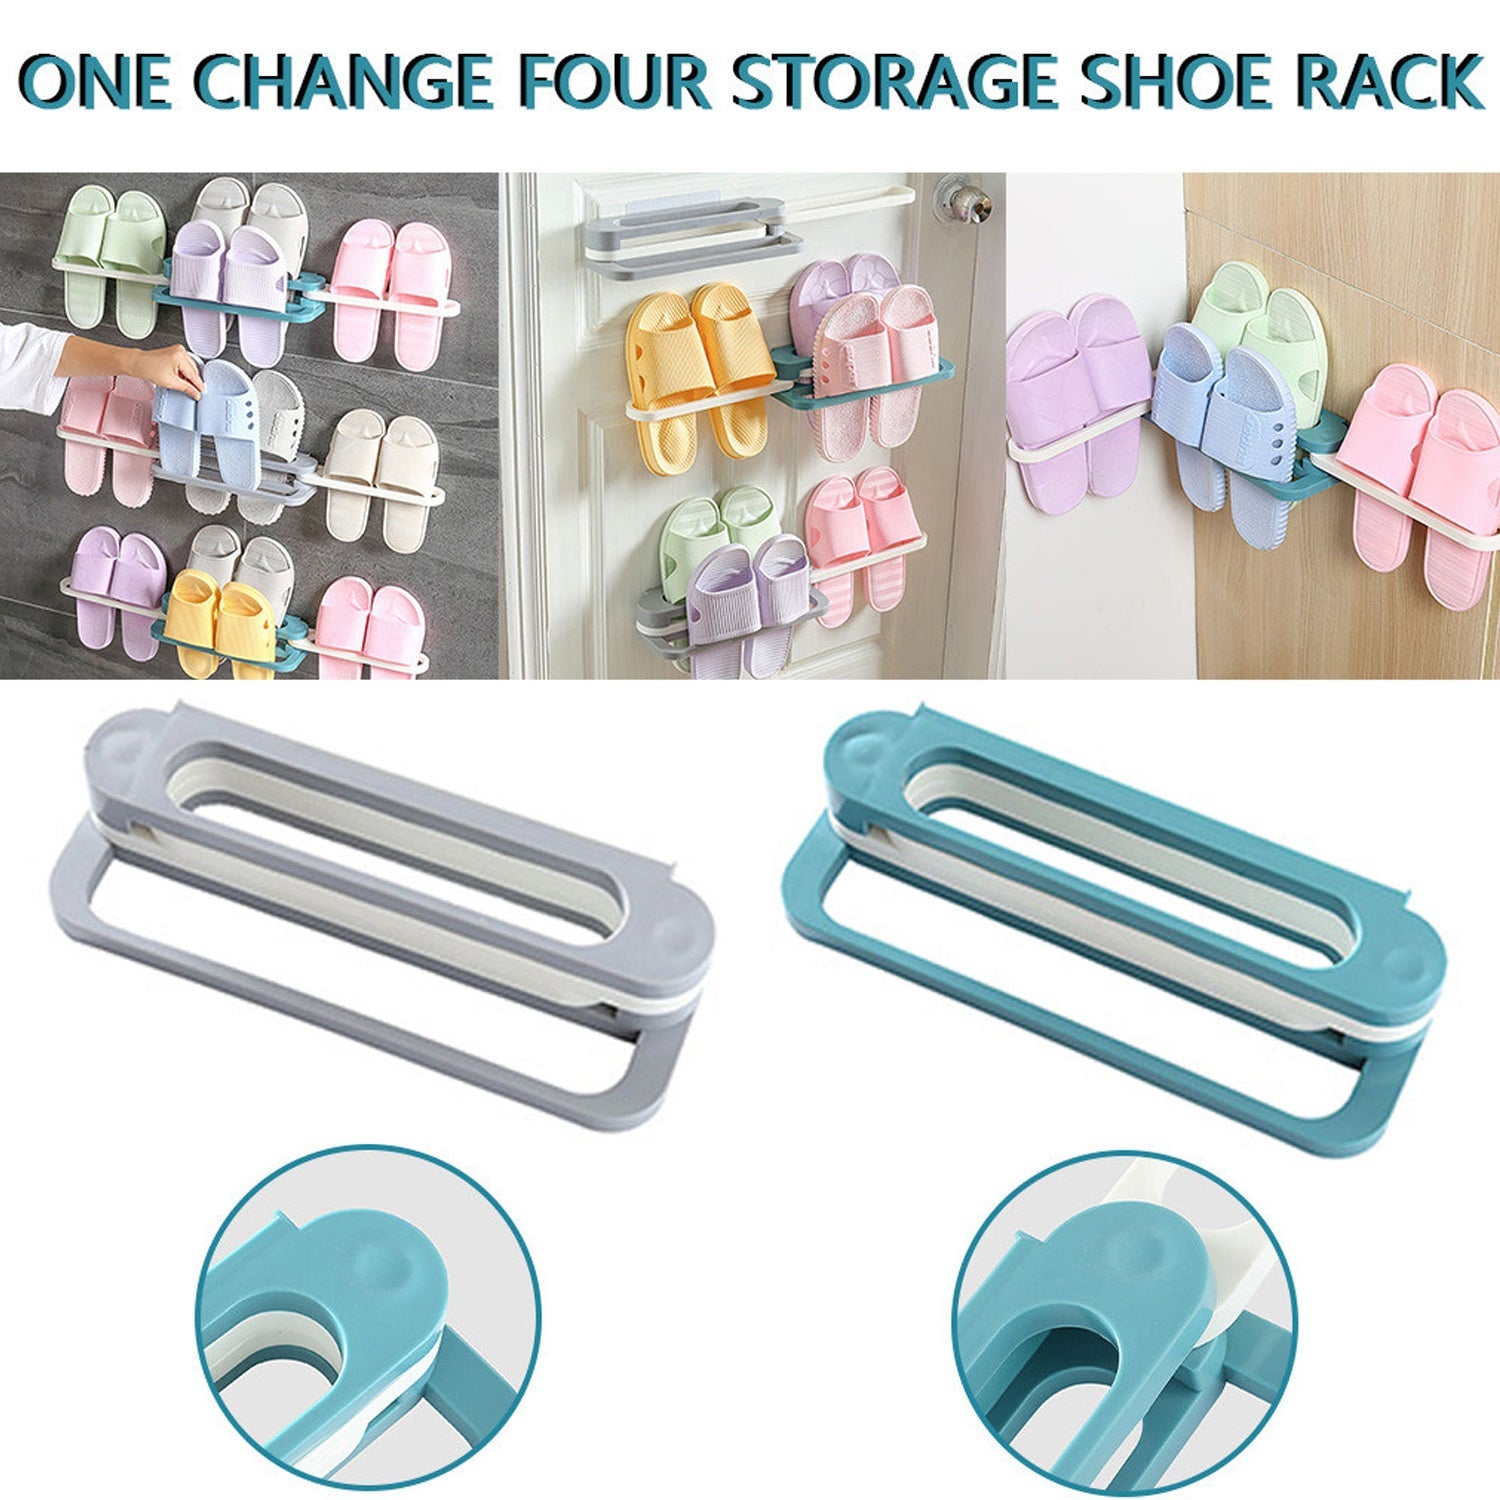 1122A Plastic Folding Shoe Rack Organizer with Wall Mounted DoeDap